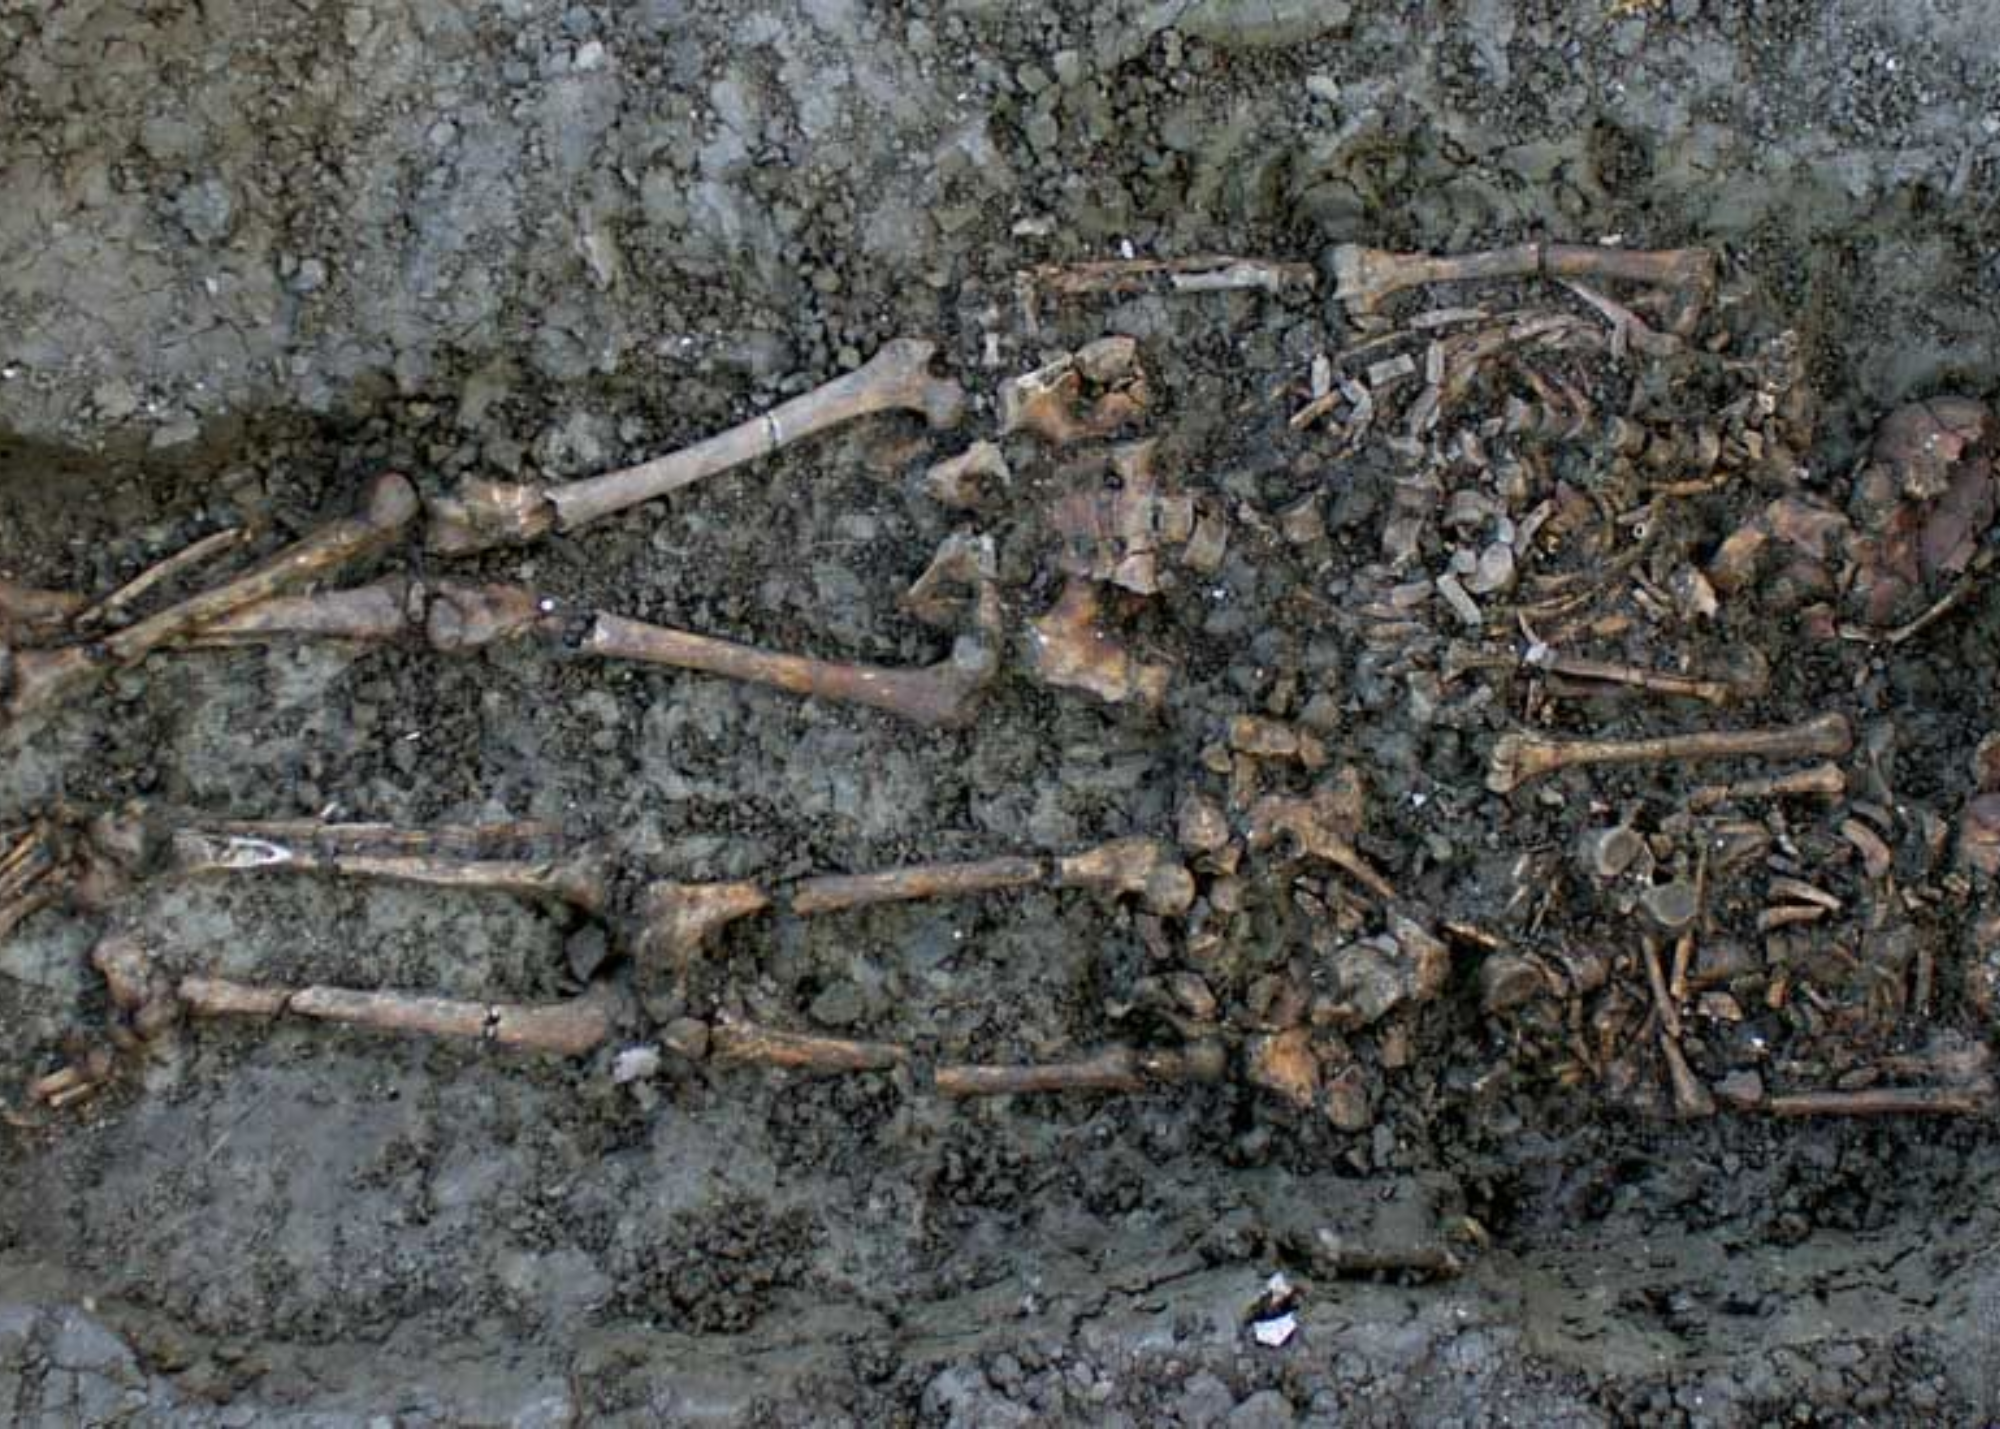 Analysis Of Roman DNA In Human Bones Uncovers A 'Family Tragedy'